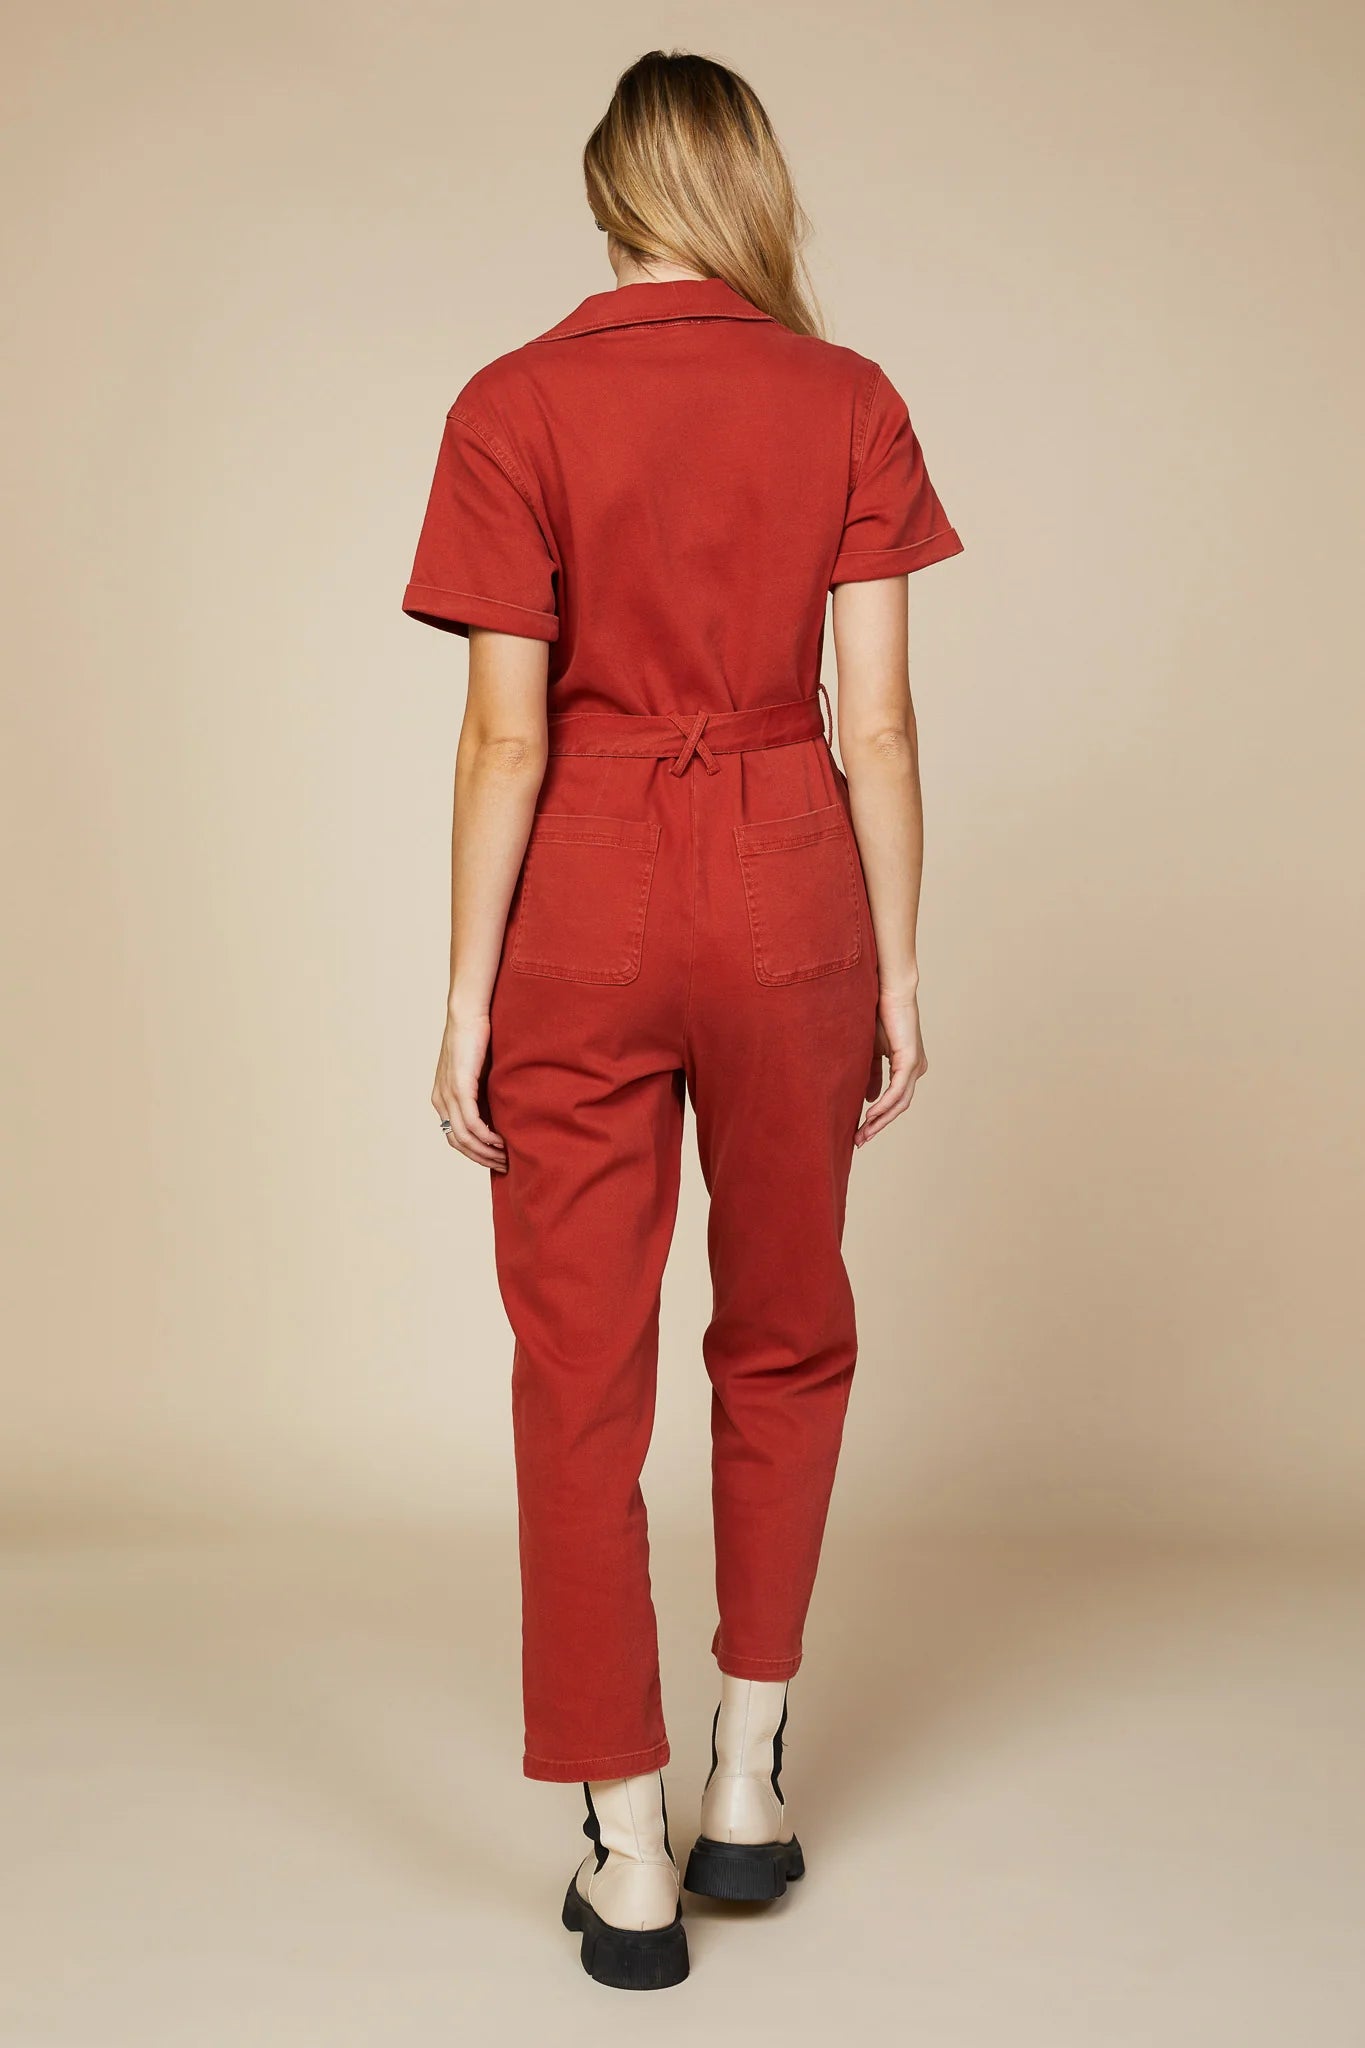 The Kendall Jumpsuit